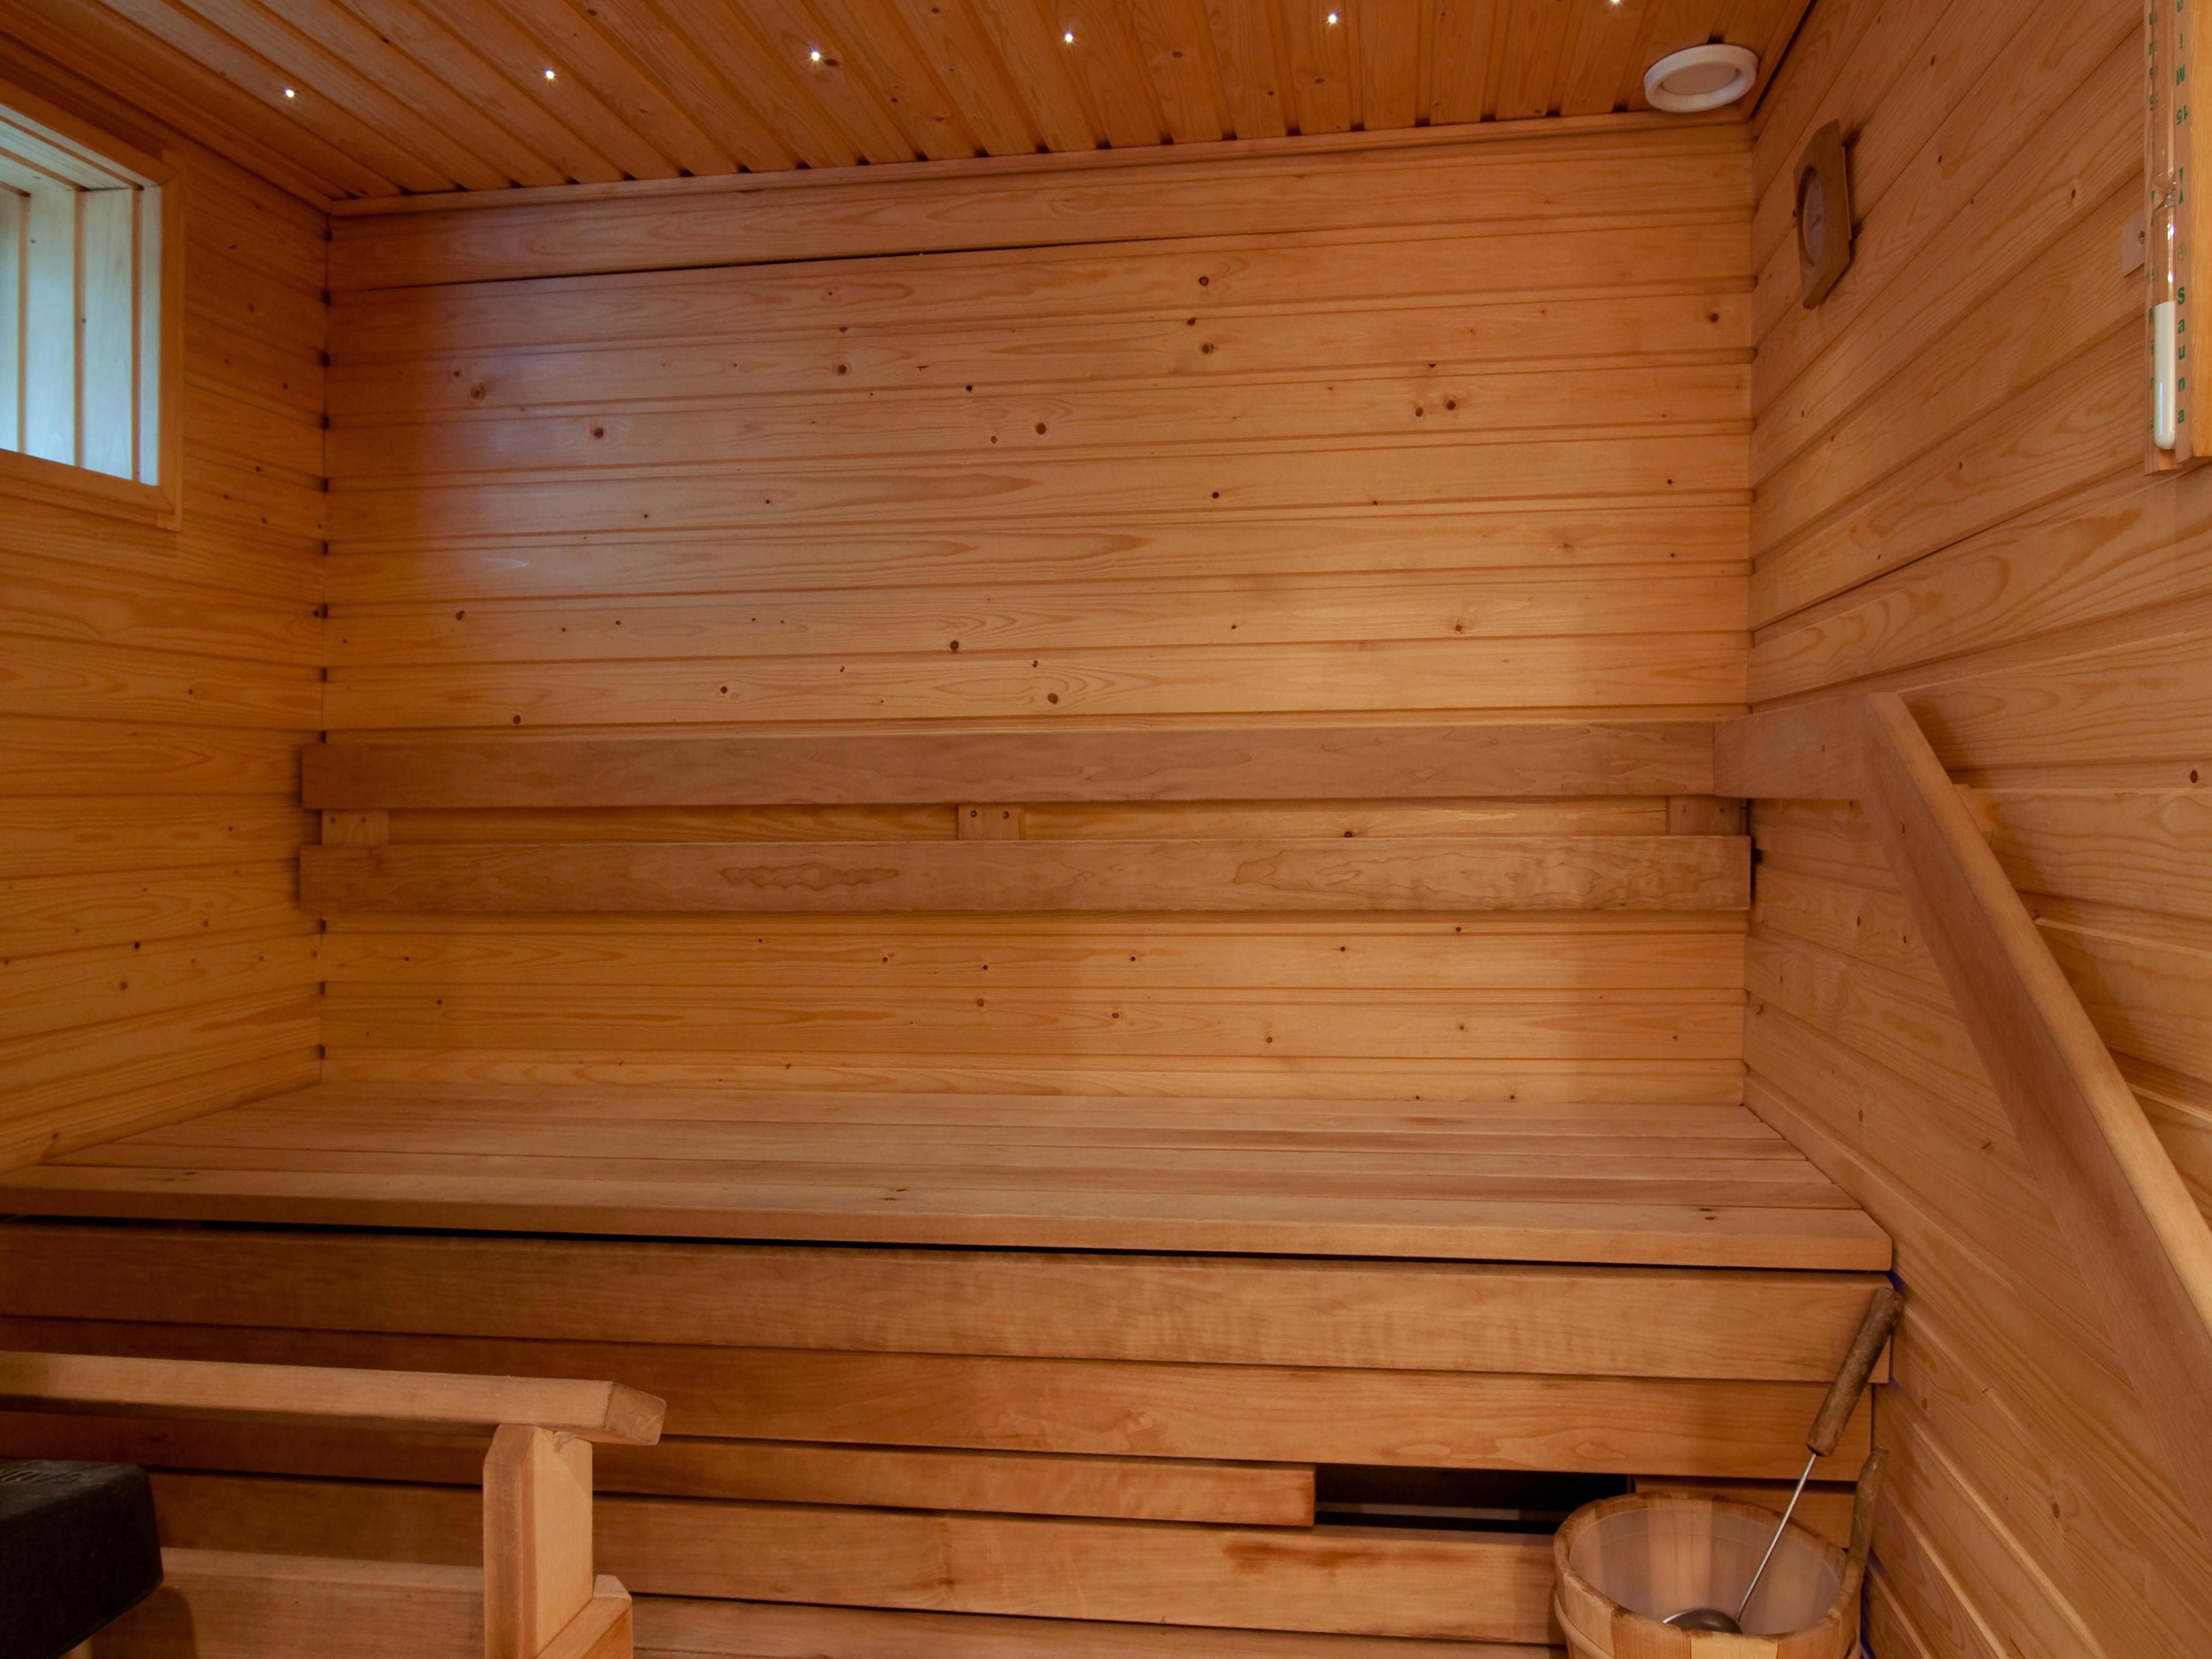 Did you know that we have one real gem among our guest rooms. Room with own Sauna! Located on the 2nd floor of the hotel, this room has also a connecting door that can give you more space with another double room - for example traveling with kids.
Psst! there is only one of these special rooms, so act on time. Ask more from our hotel.